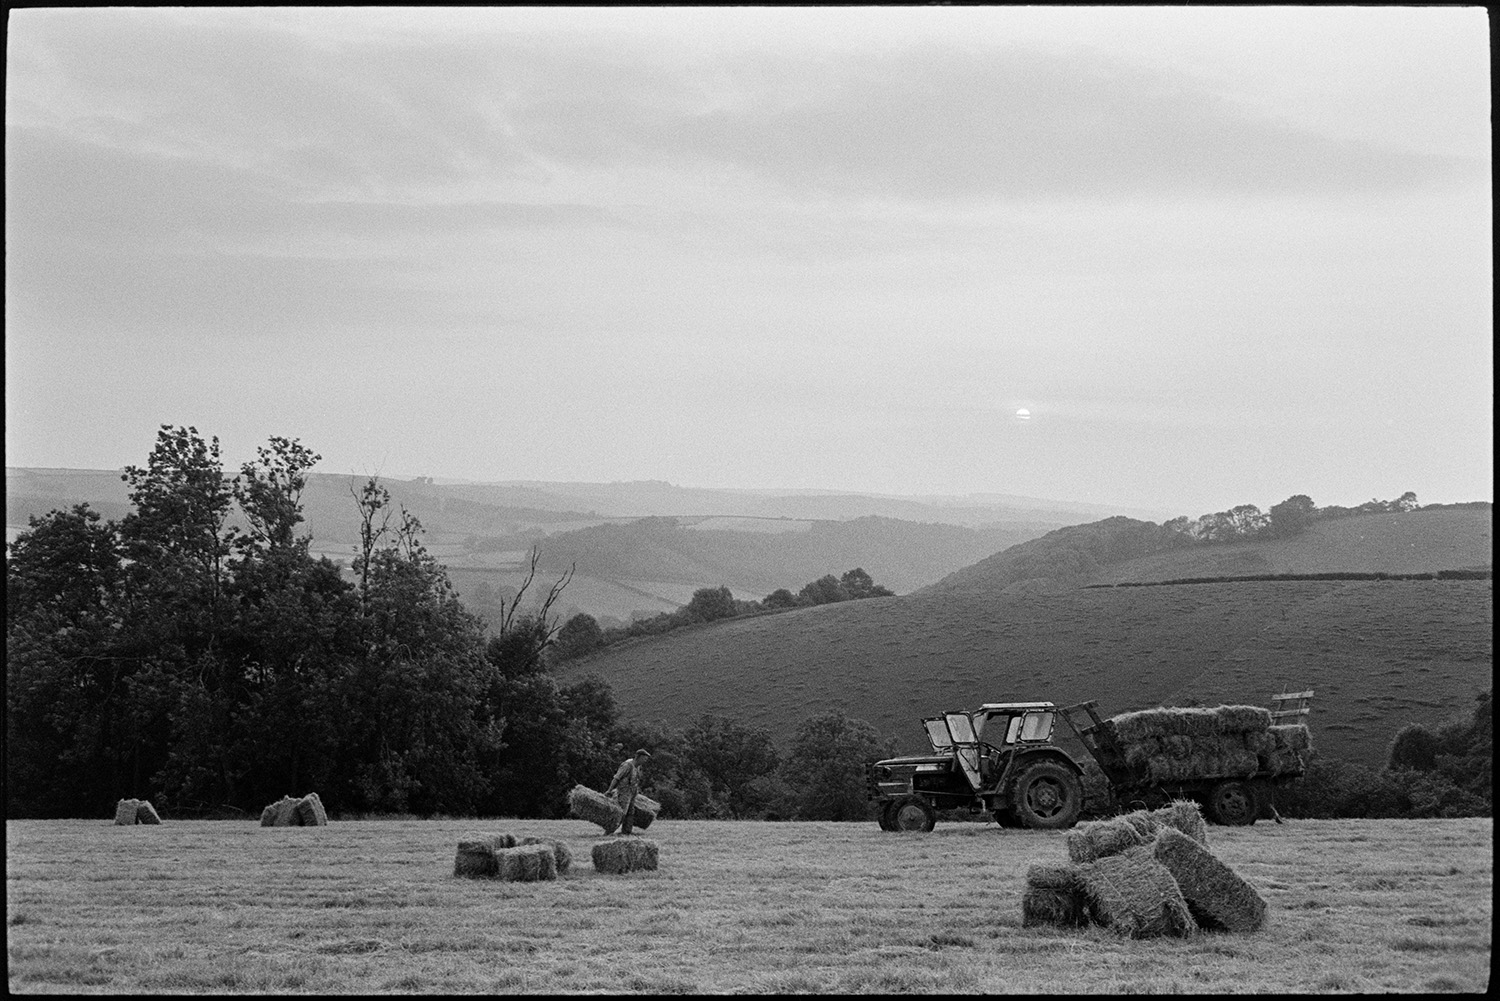 Farmer loading hay bales onto trailer, evening. 
[George Ayre loading hay bales onto a tractor and trailer in a field at Ashwell, Dolton, in the evening. Stacks of hay bales can be seen in the field and fields are visible on a hillside in the background.]